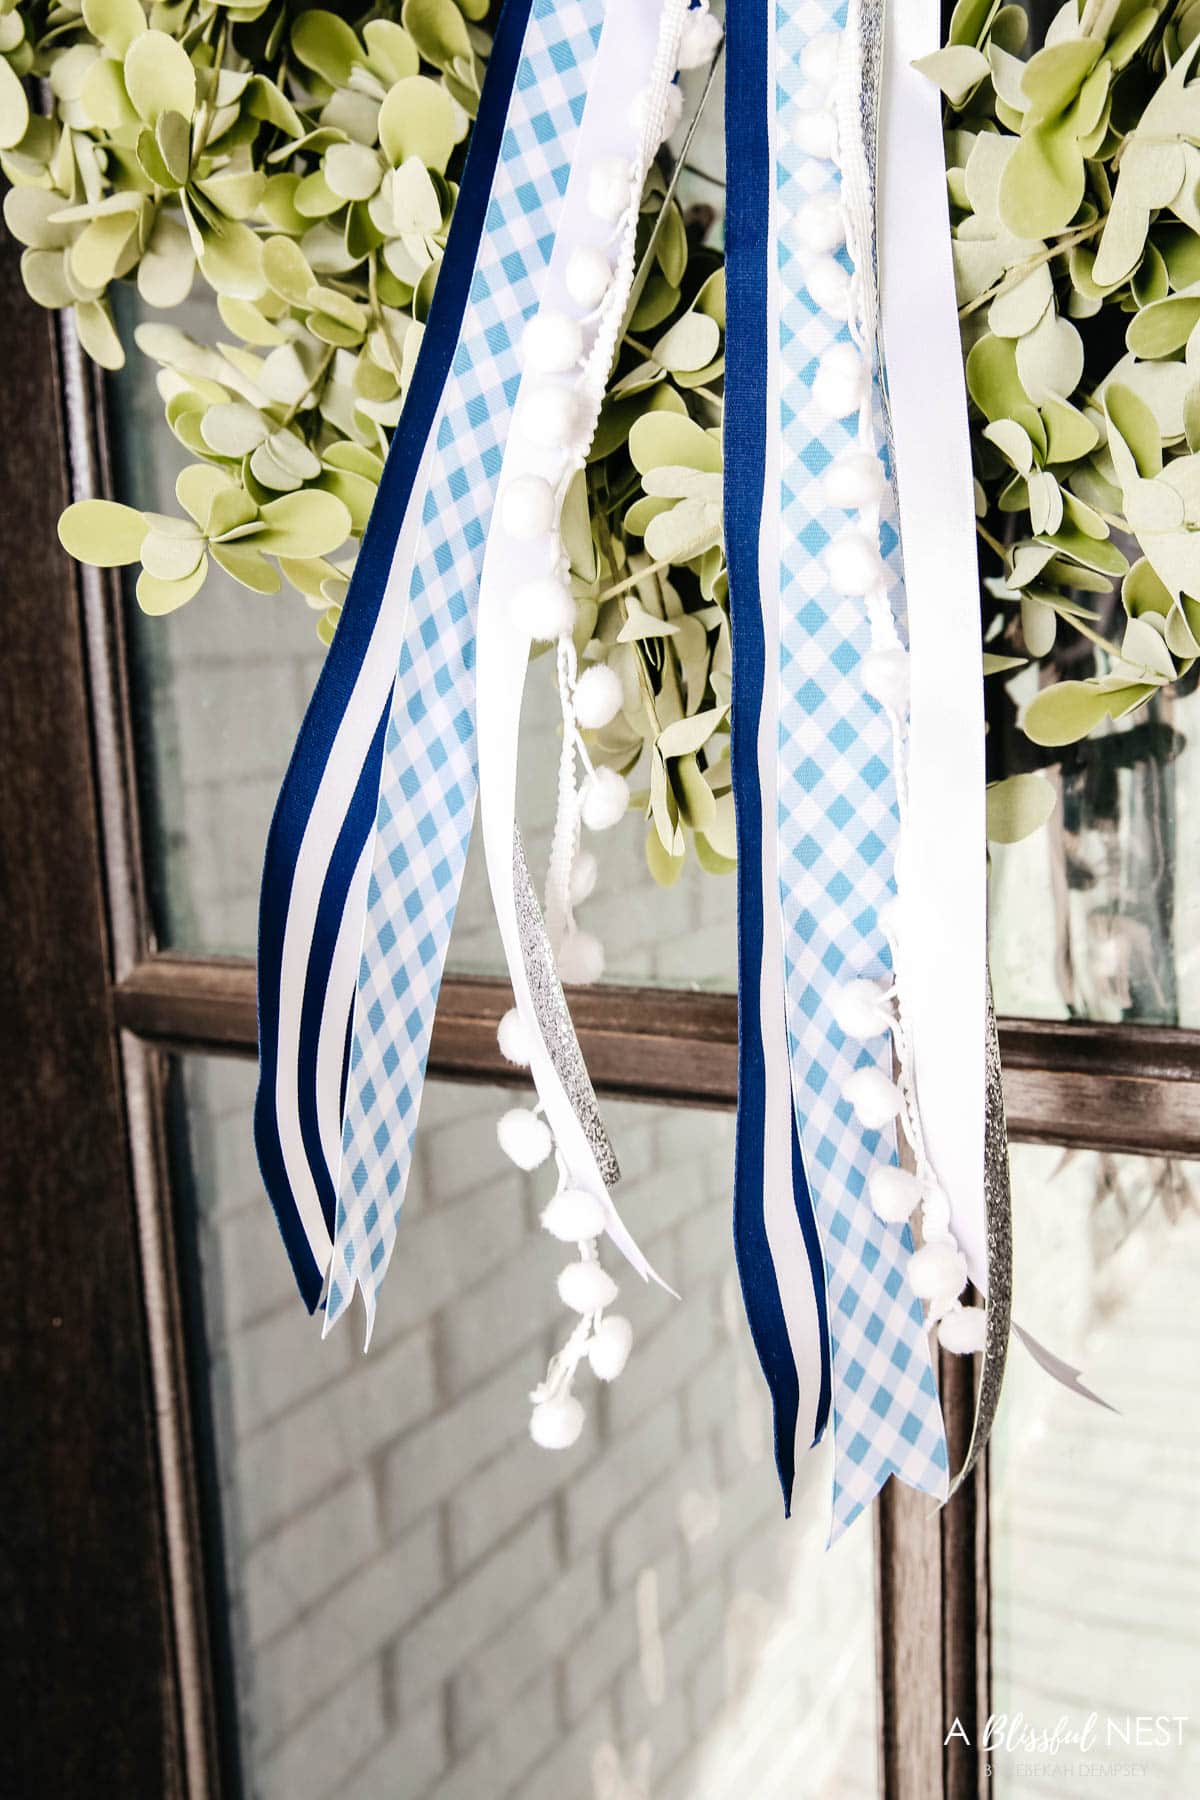 Shades of blue and white ribbons - navy blue and white stripe, blue and white gingham, thing white, and a silver ribbon.